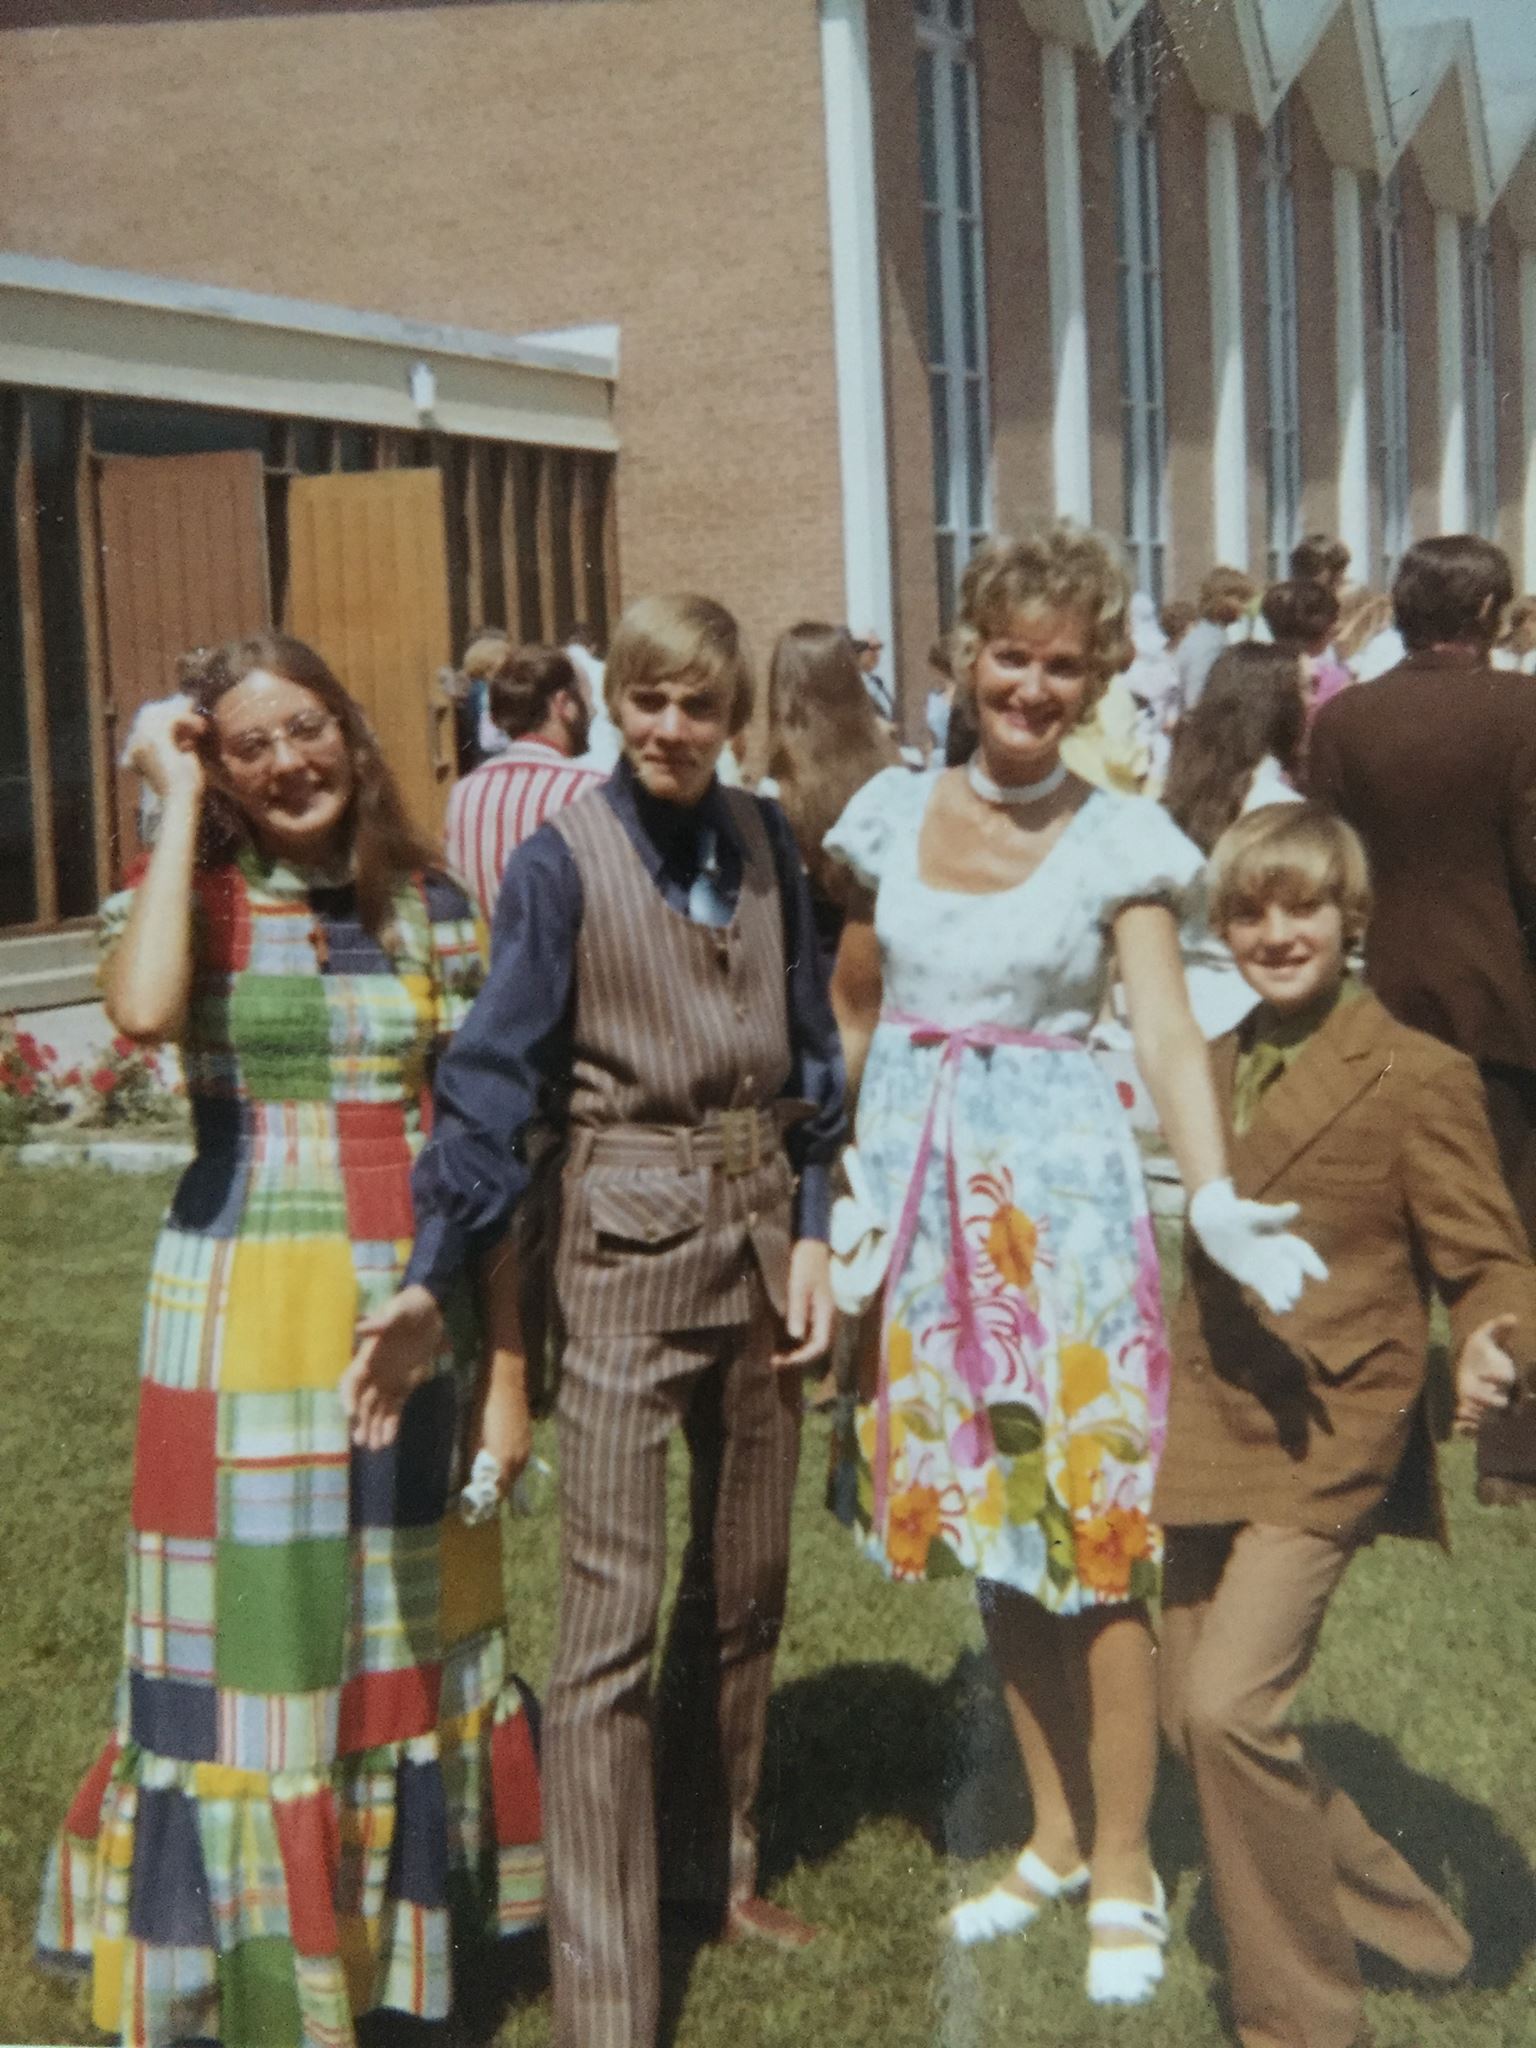 Erin's mom - Susan Moore with her mother and brothers in 1969